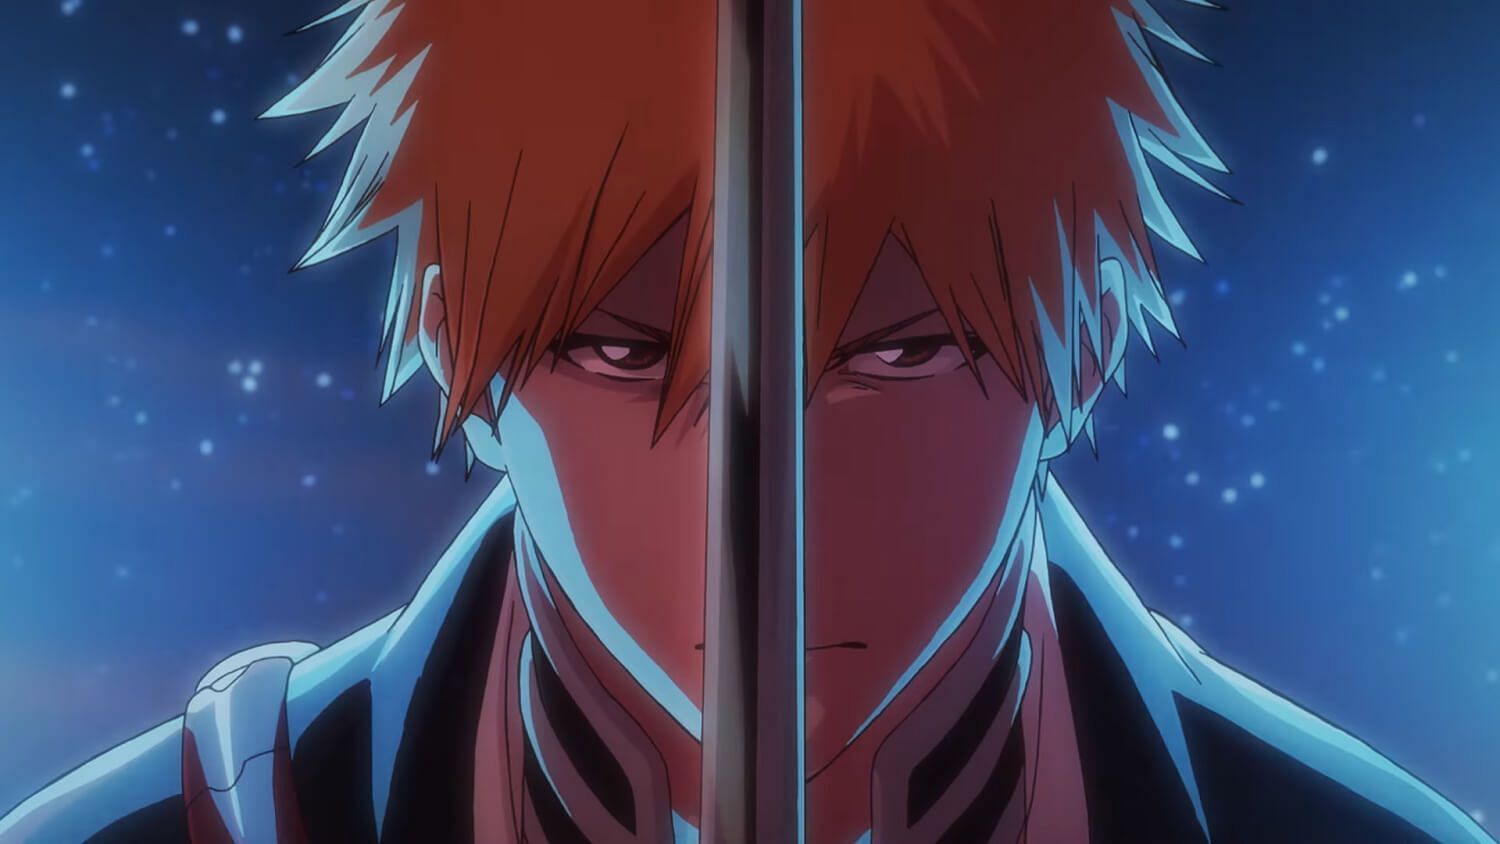 Bleach Anime Calendar 2022 free download and printable